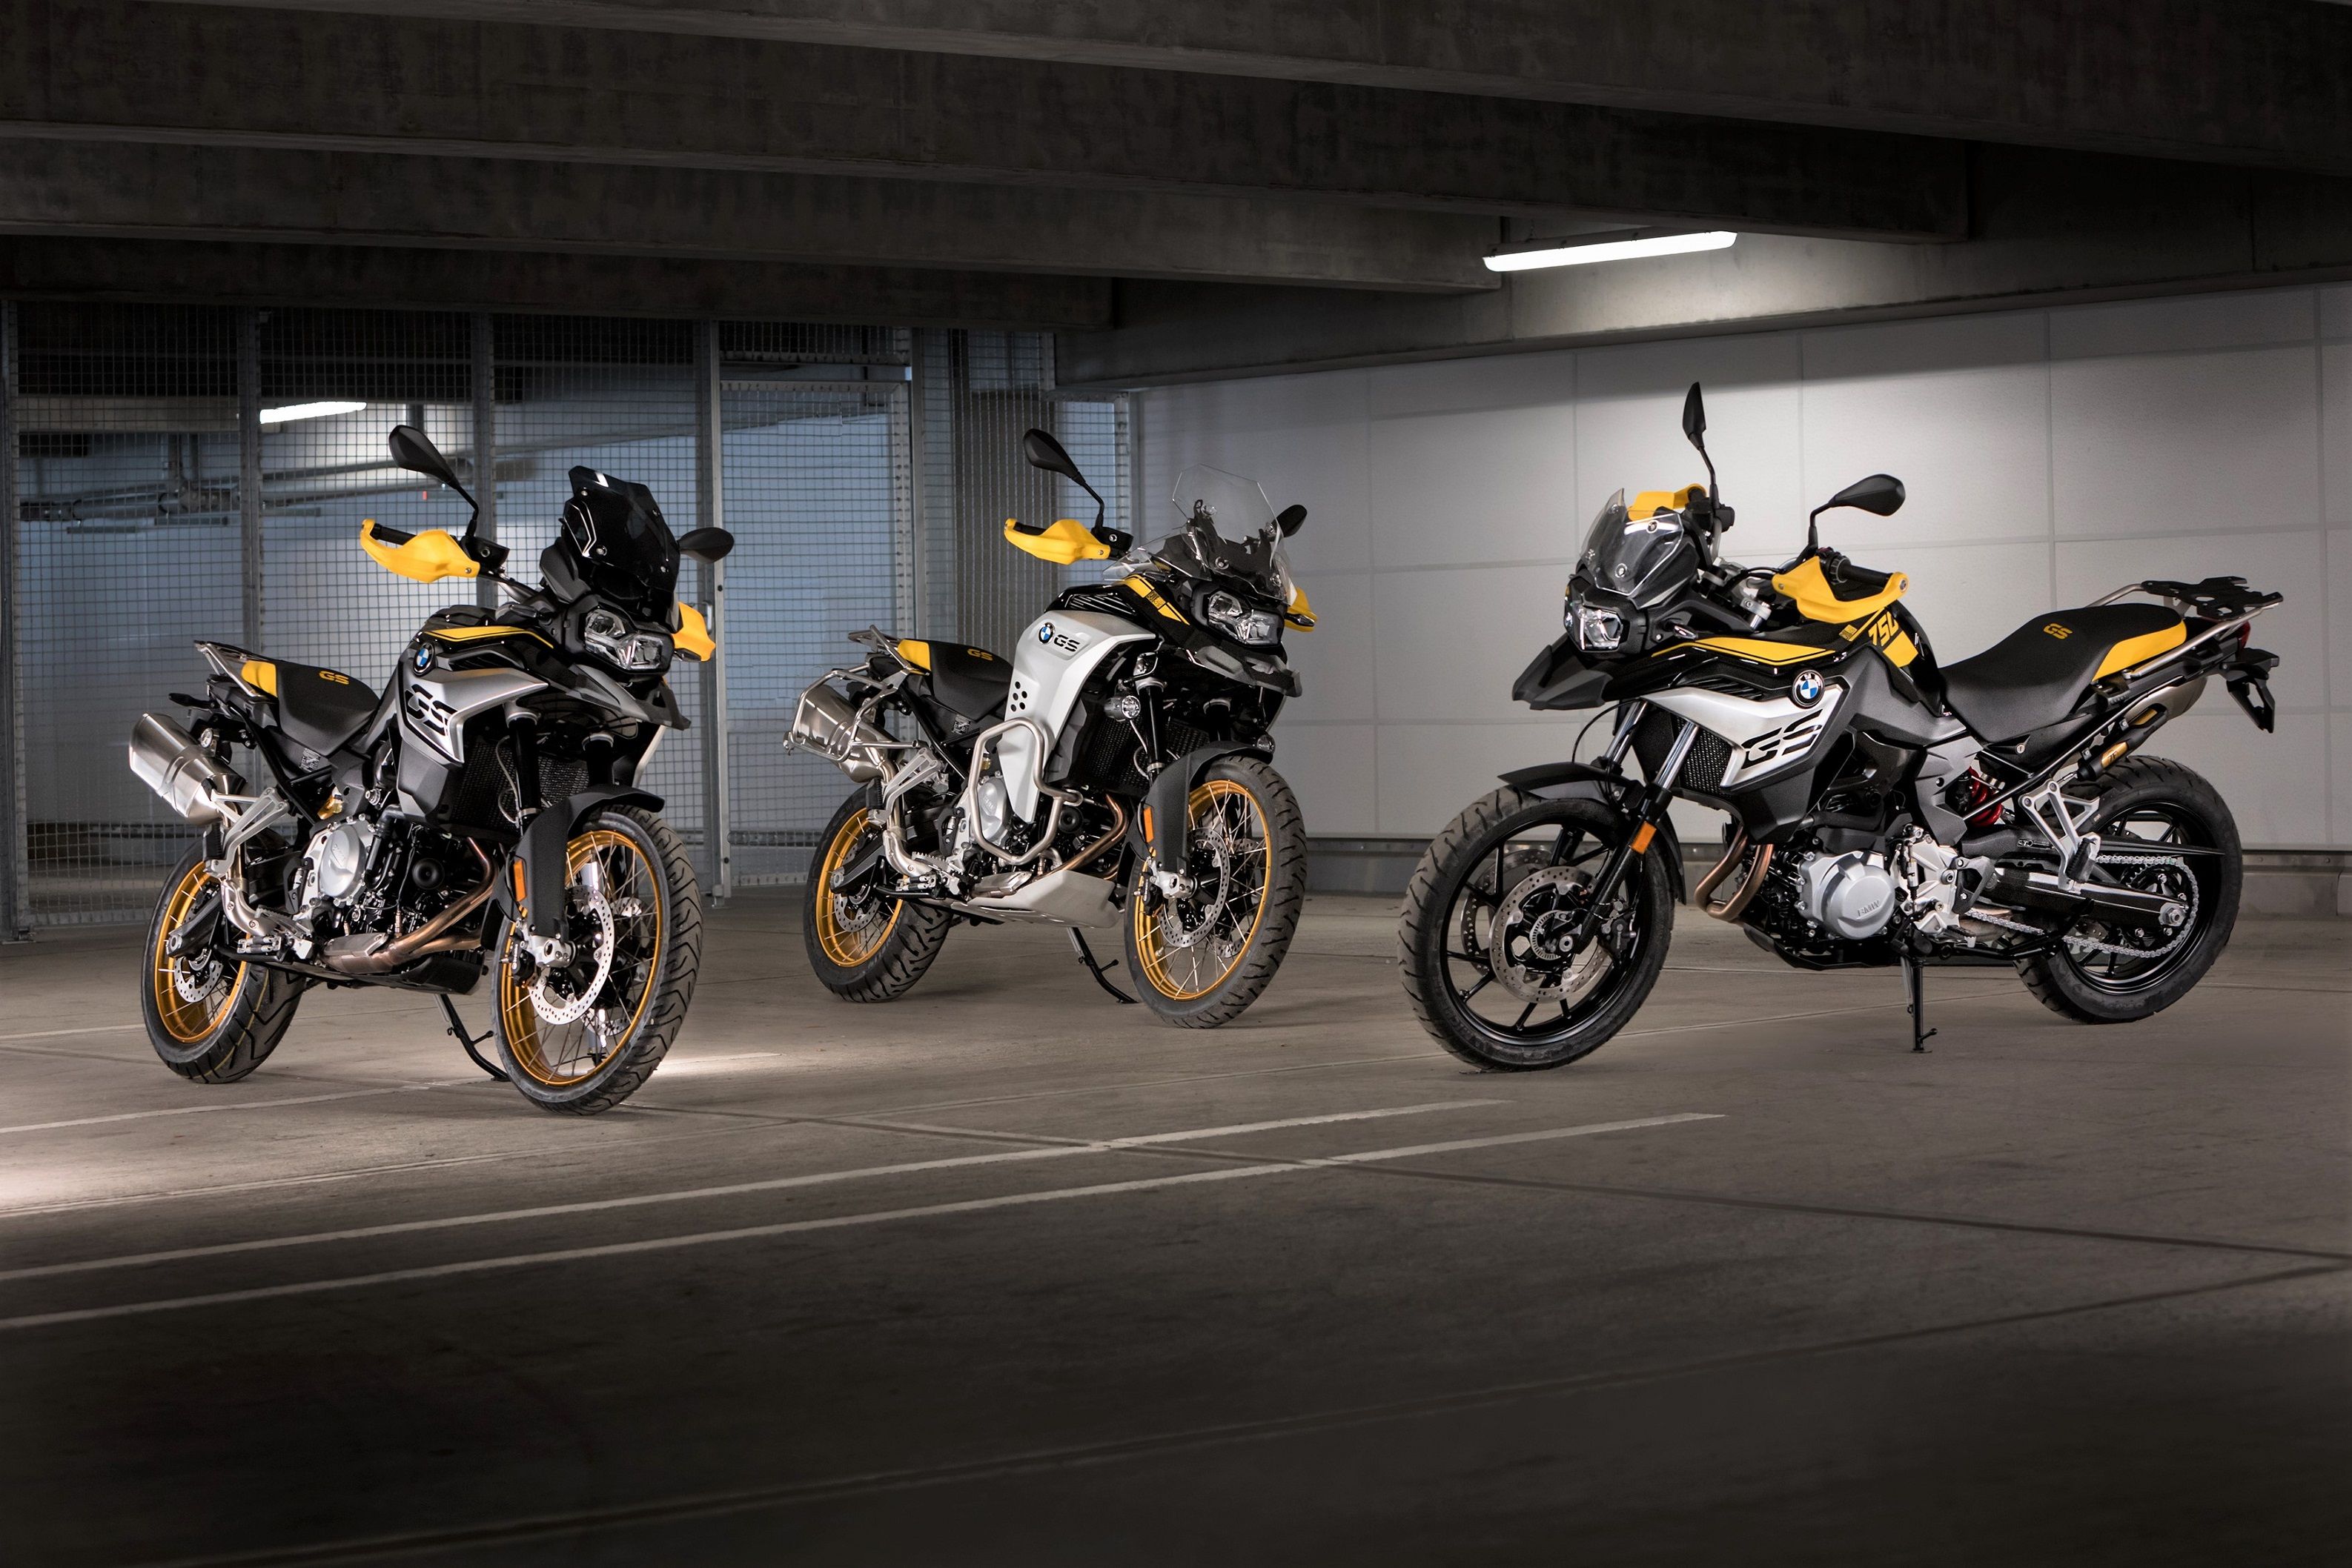 BMW F 750 GS, F 850 GS, And F 850 GS Adventure Released